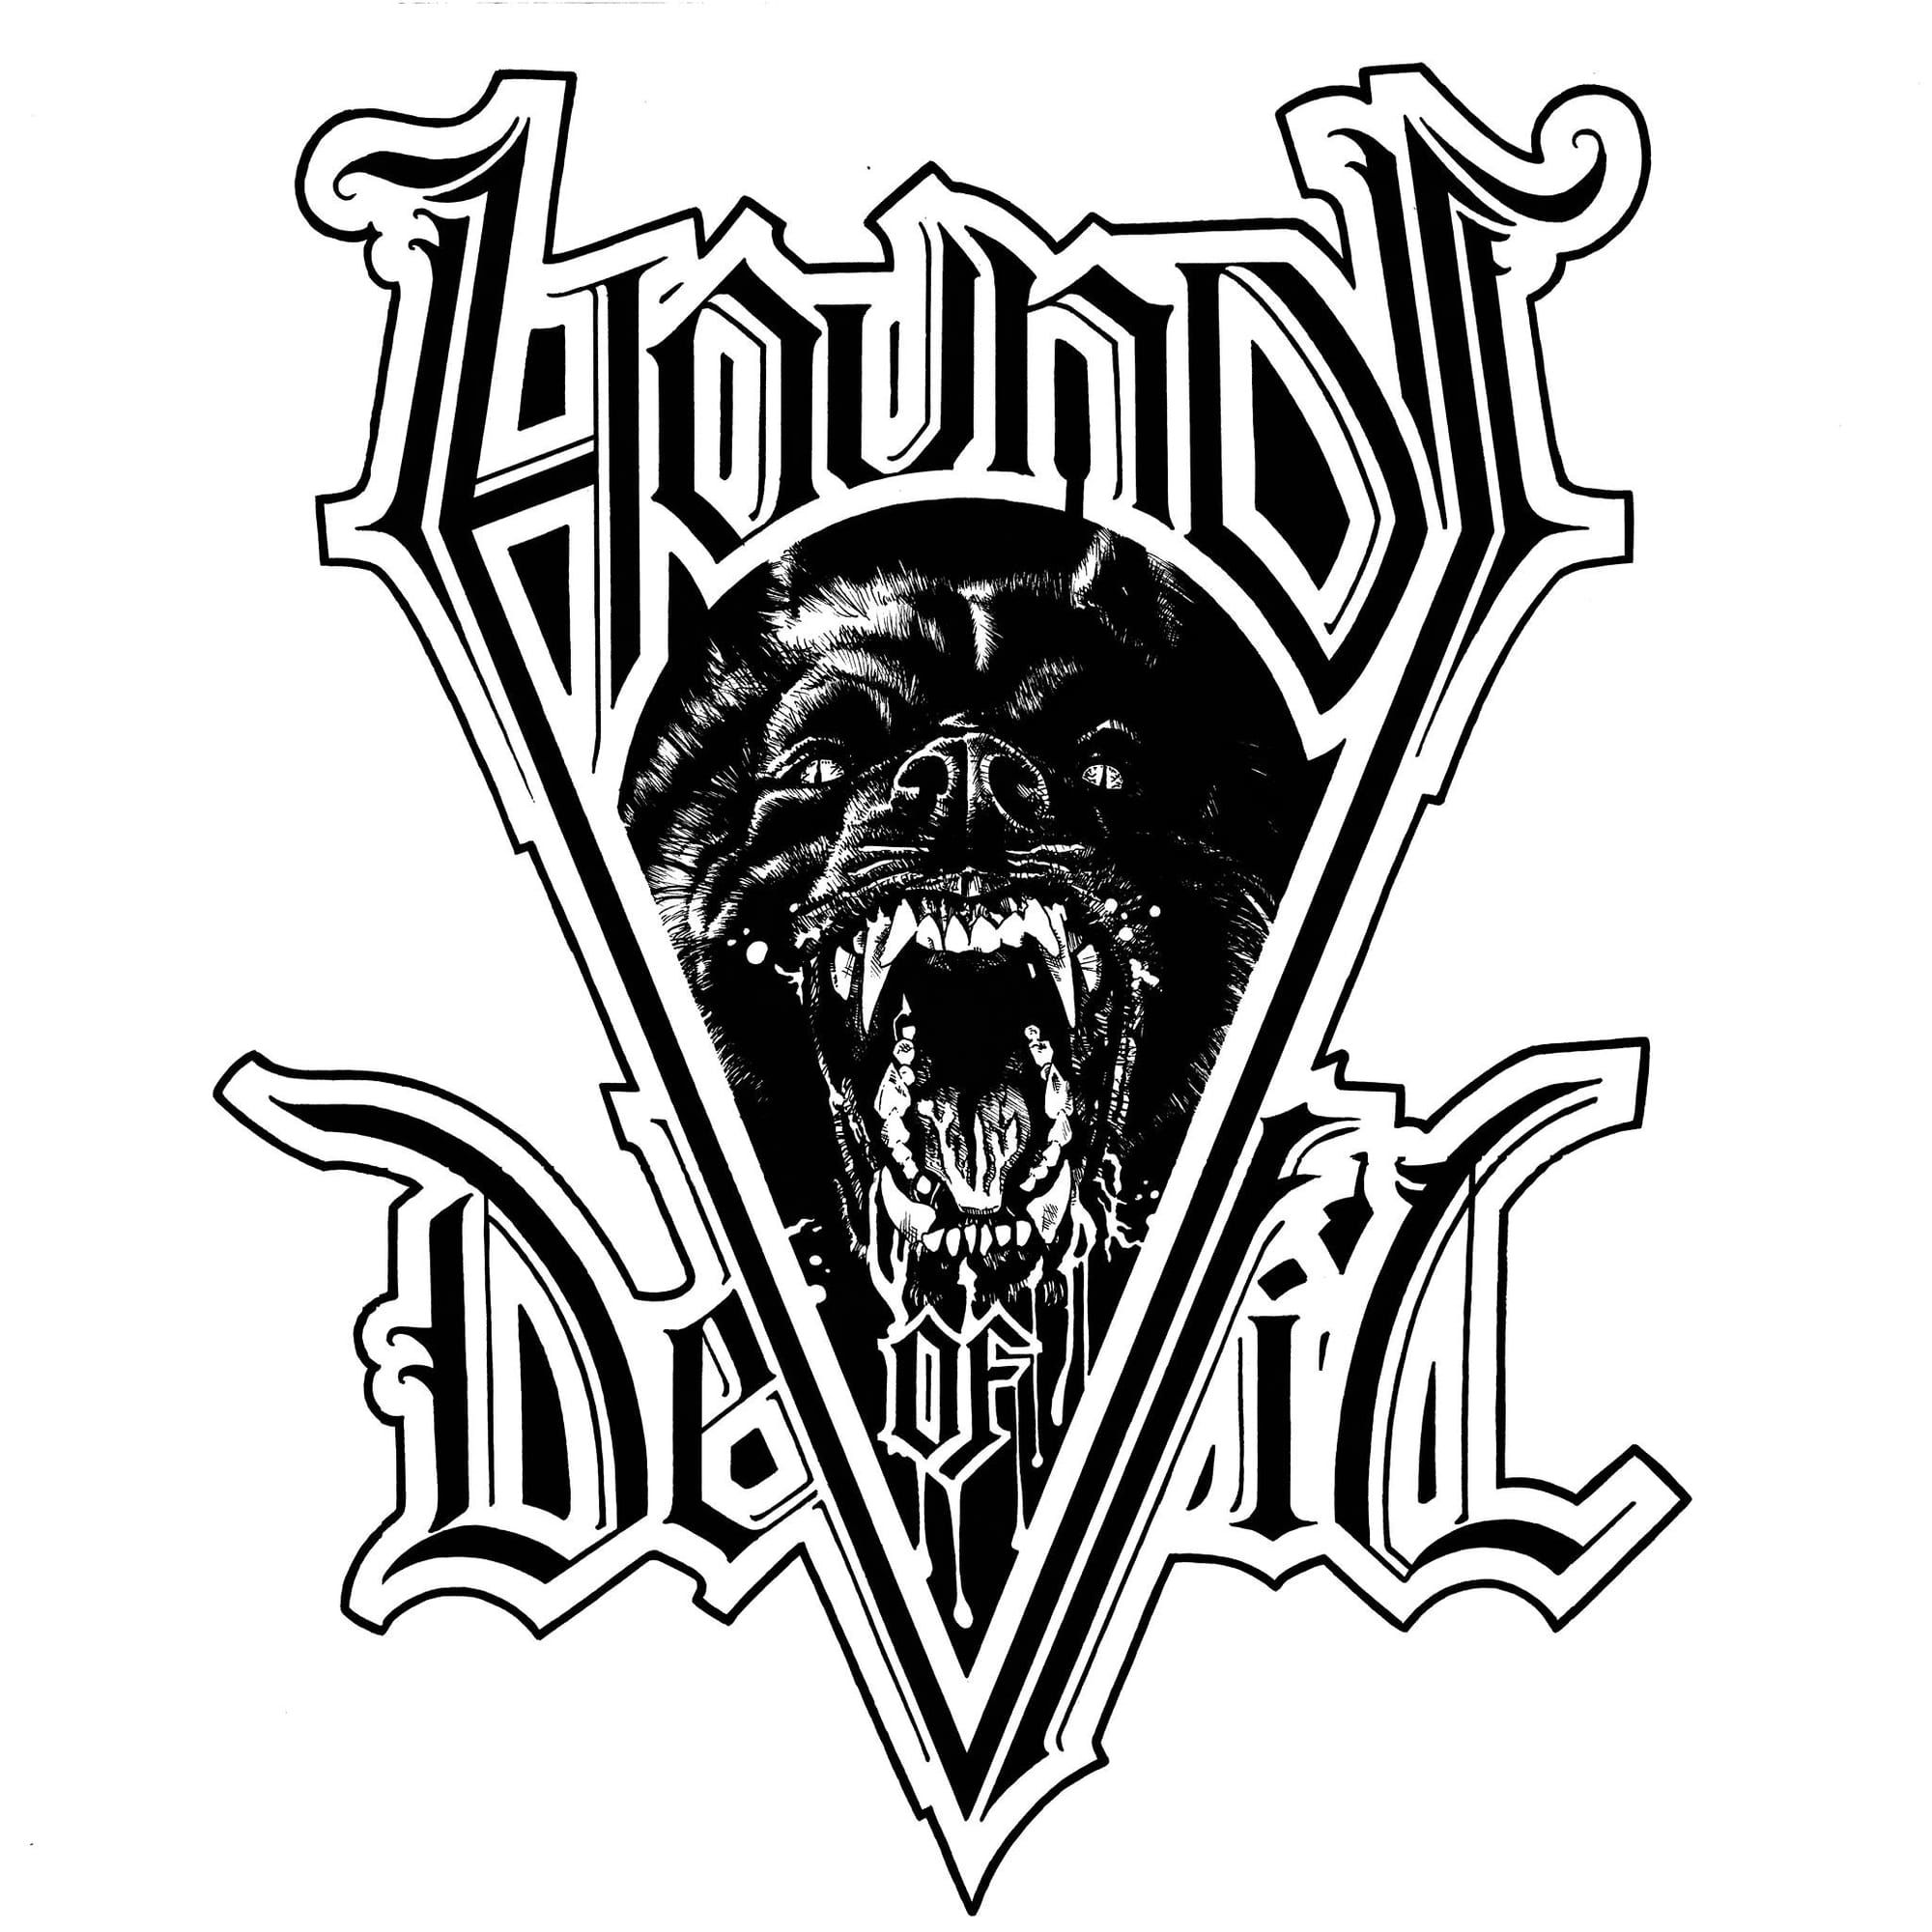 Interview with HOUNDS OF DEVIL